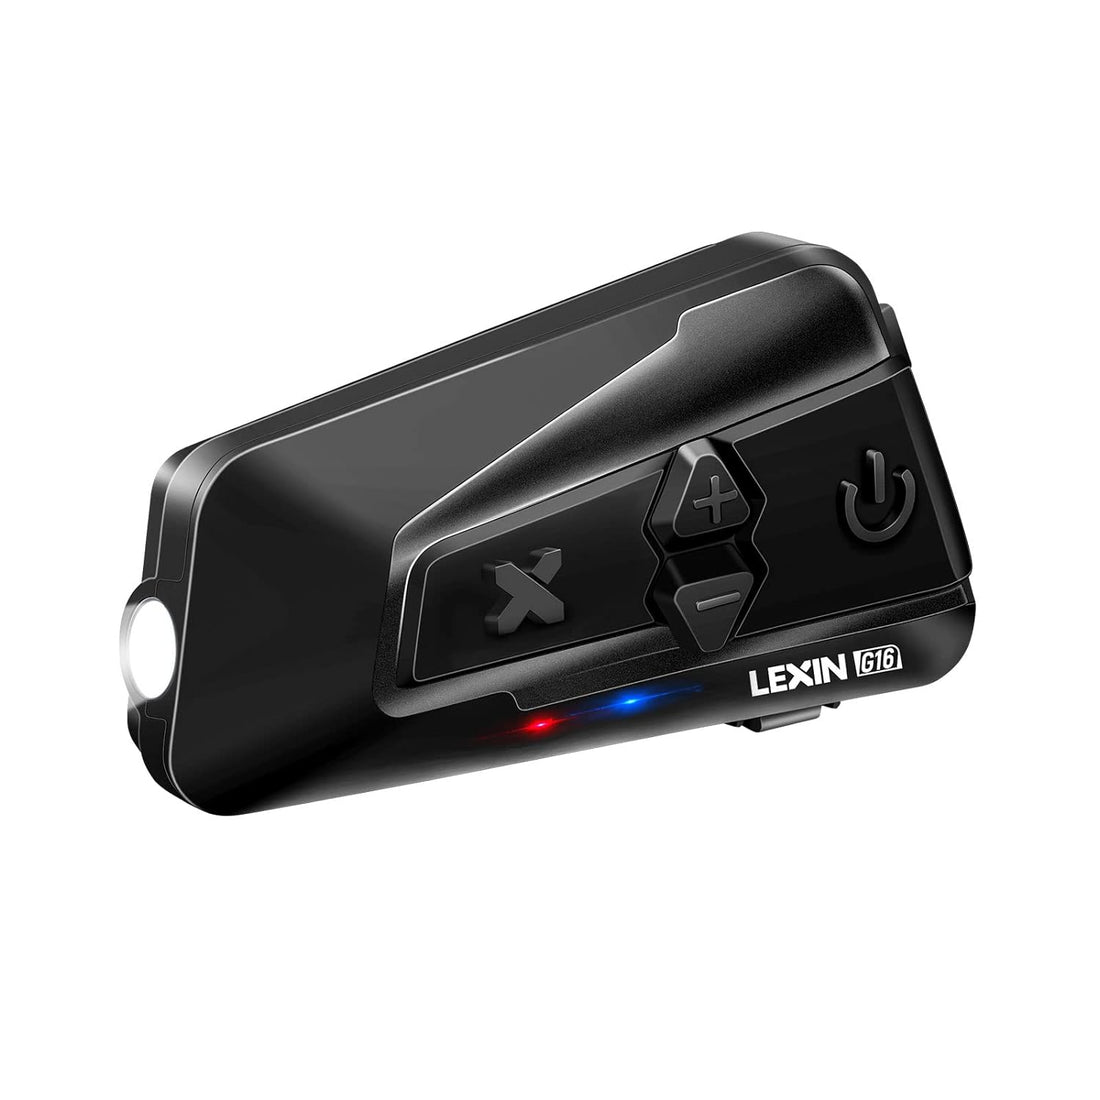 LEXIN 1pc G16 Motorcycle Bluetooth Headset with Headlamp/SOS Mode, Up to 16 Riders 2000m Group Talk Helmet Commnunication System, Motorcycle Intercom with Music Sharing/FM Radio/Universal Pairing/GPS